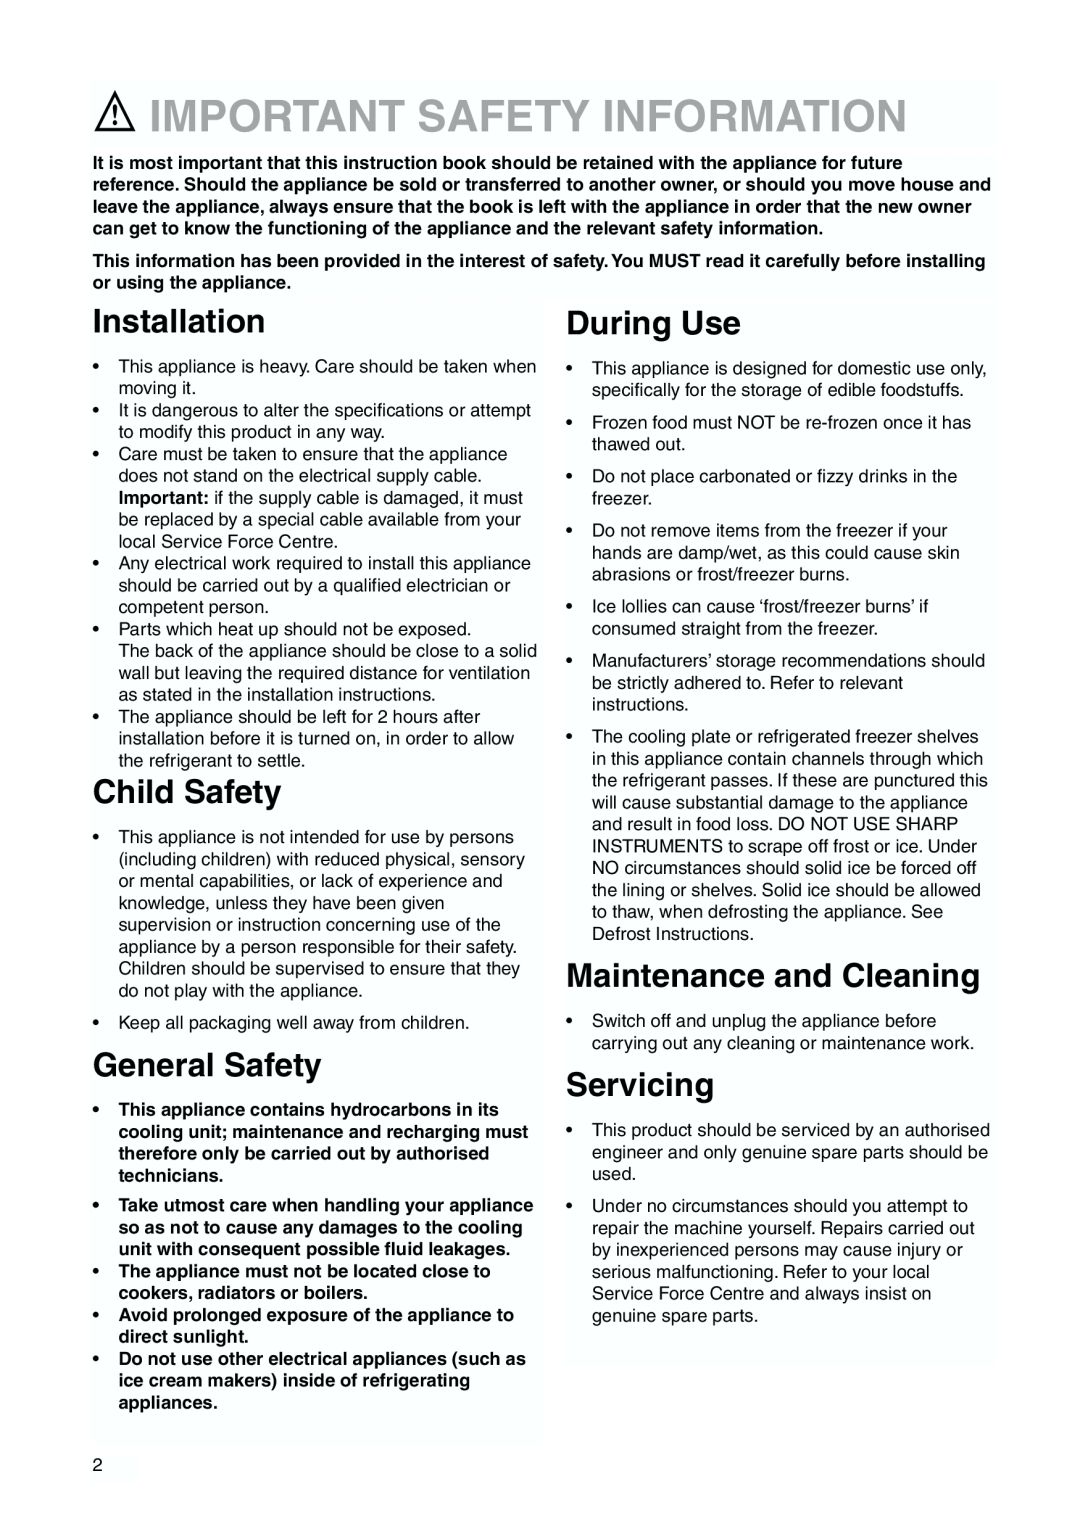 Zanussi ZBB 6244 manual Important Safety Information, Installation, Child Safety, General Safety, During Use, Servicing 